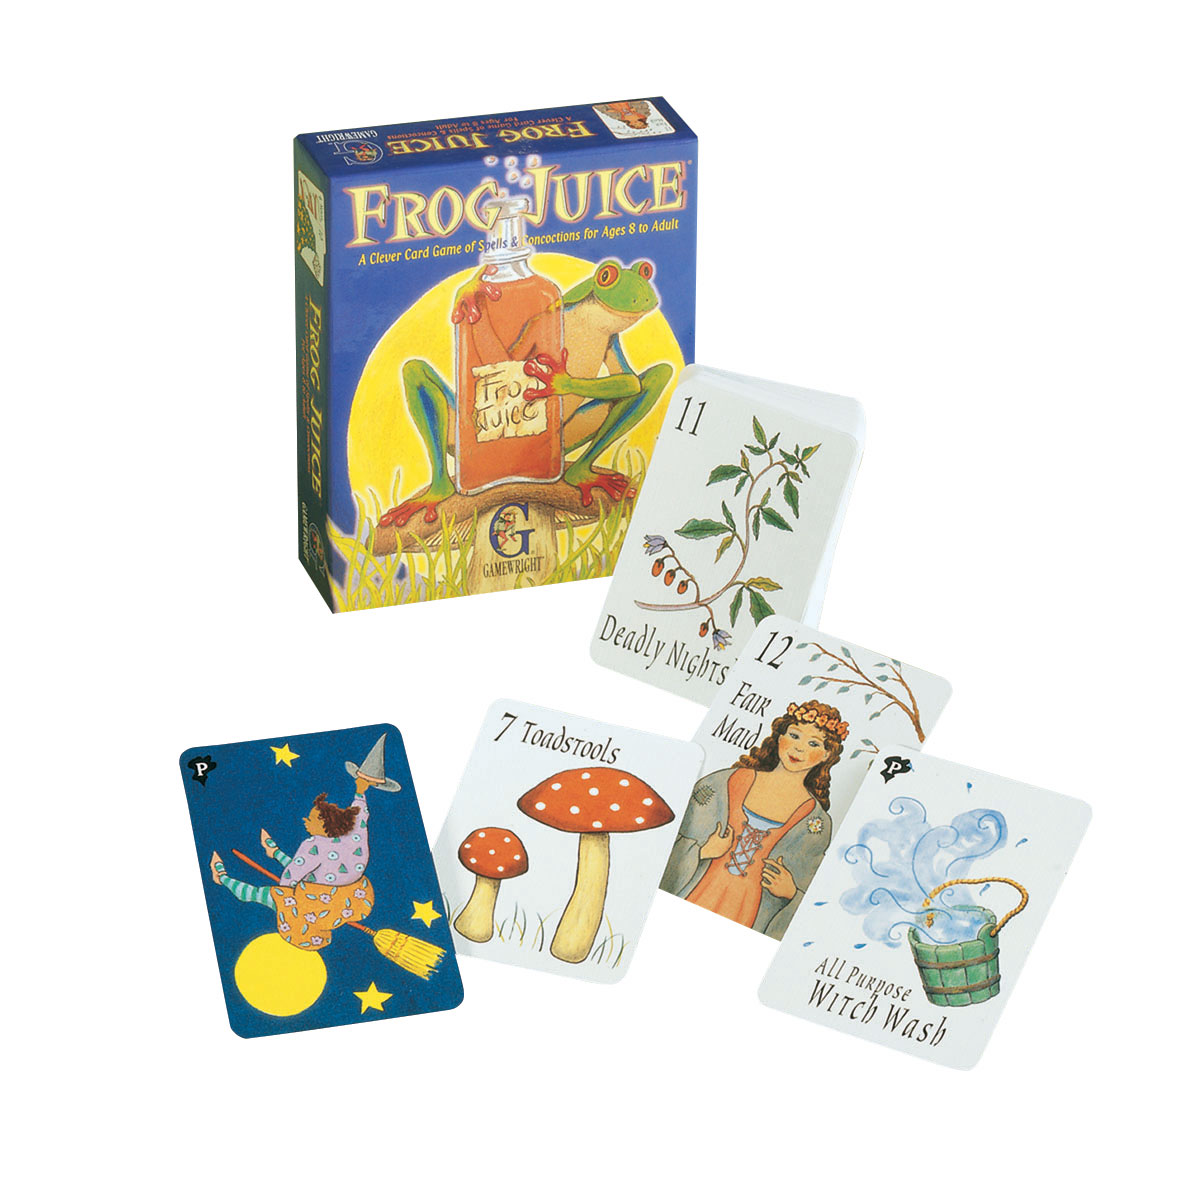 Frog Juice by Gamewright